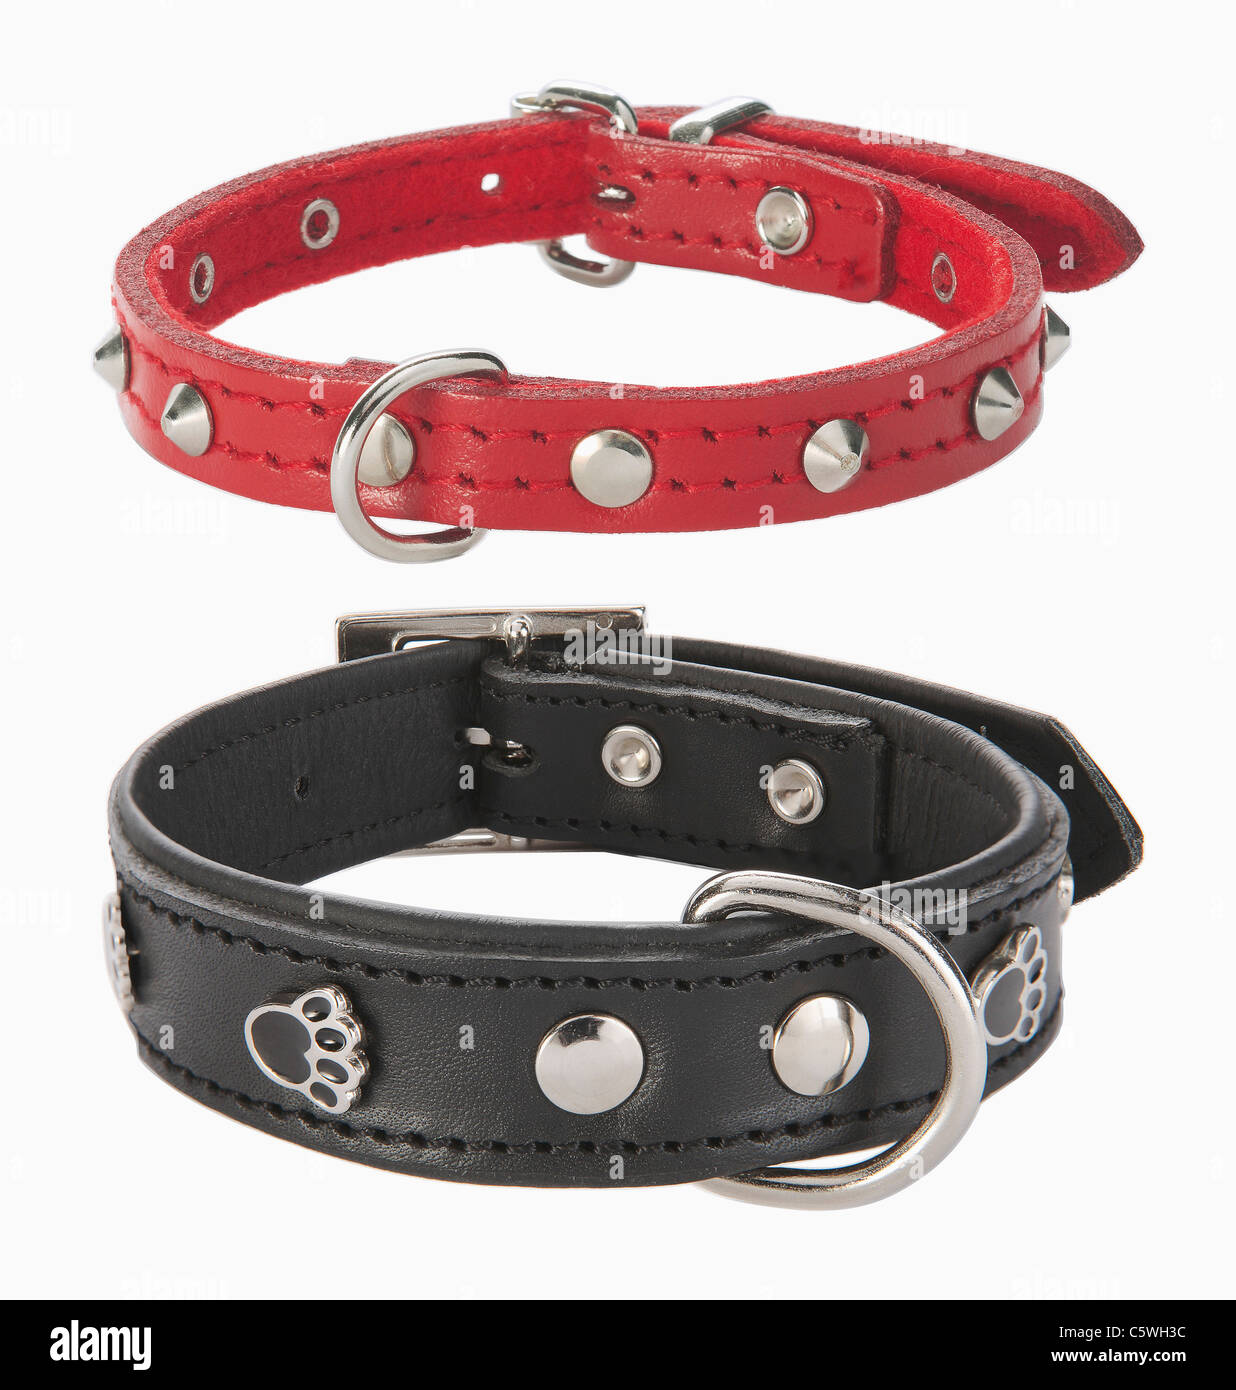 Pet collars against white background Stock Photo